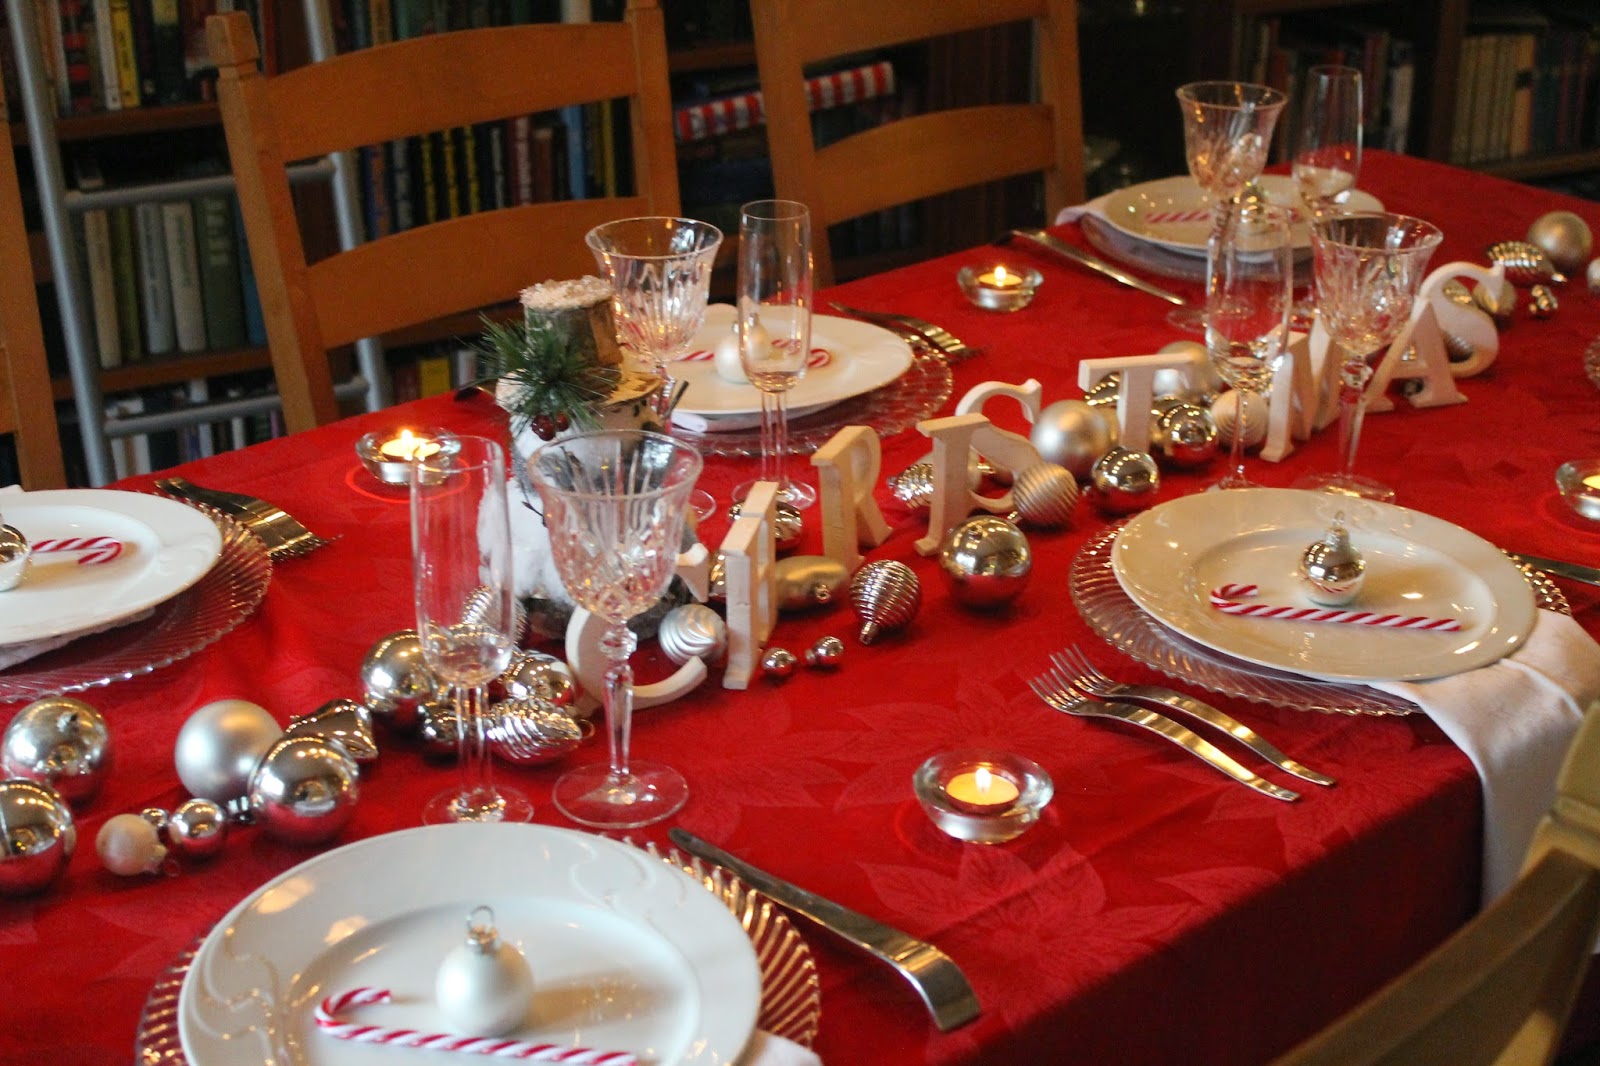 SupperTableTalk: Christmas.....another view